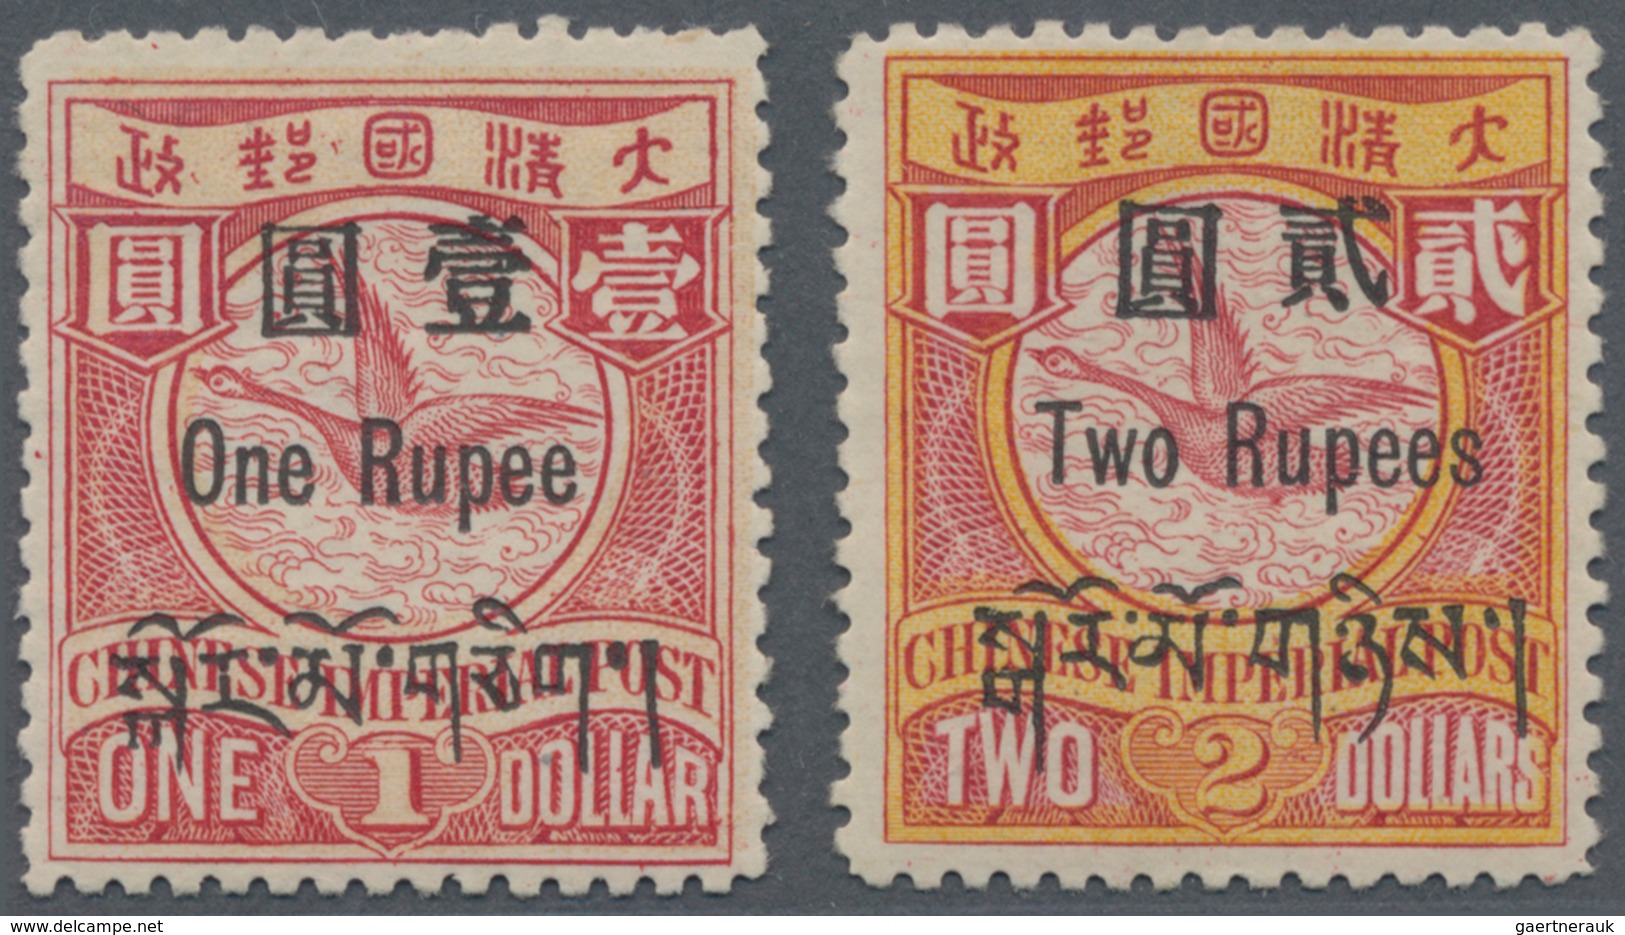 China - Provinzausgaben - Chinesische Post In Tibet (1911): 1911, Surcharges 1 R./$1 And 2 R./$2 Top - Xinjiang 1915-49